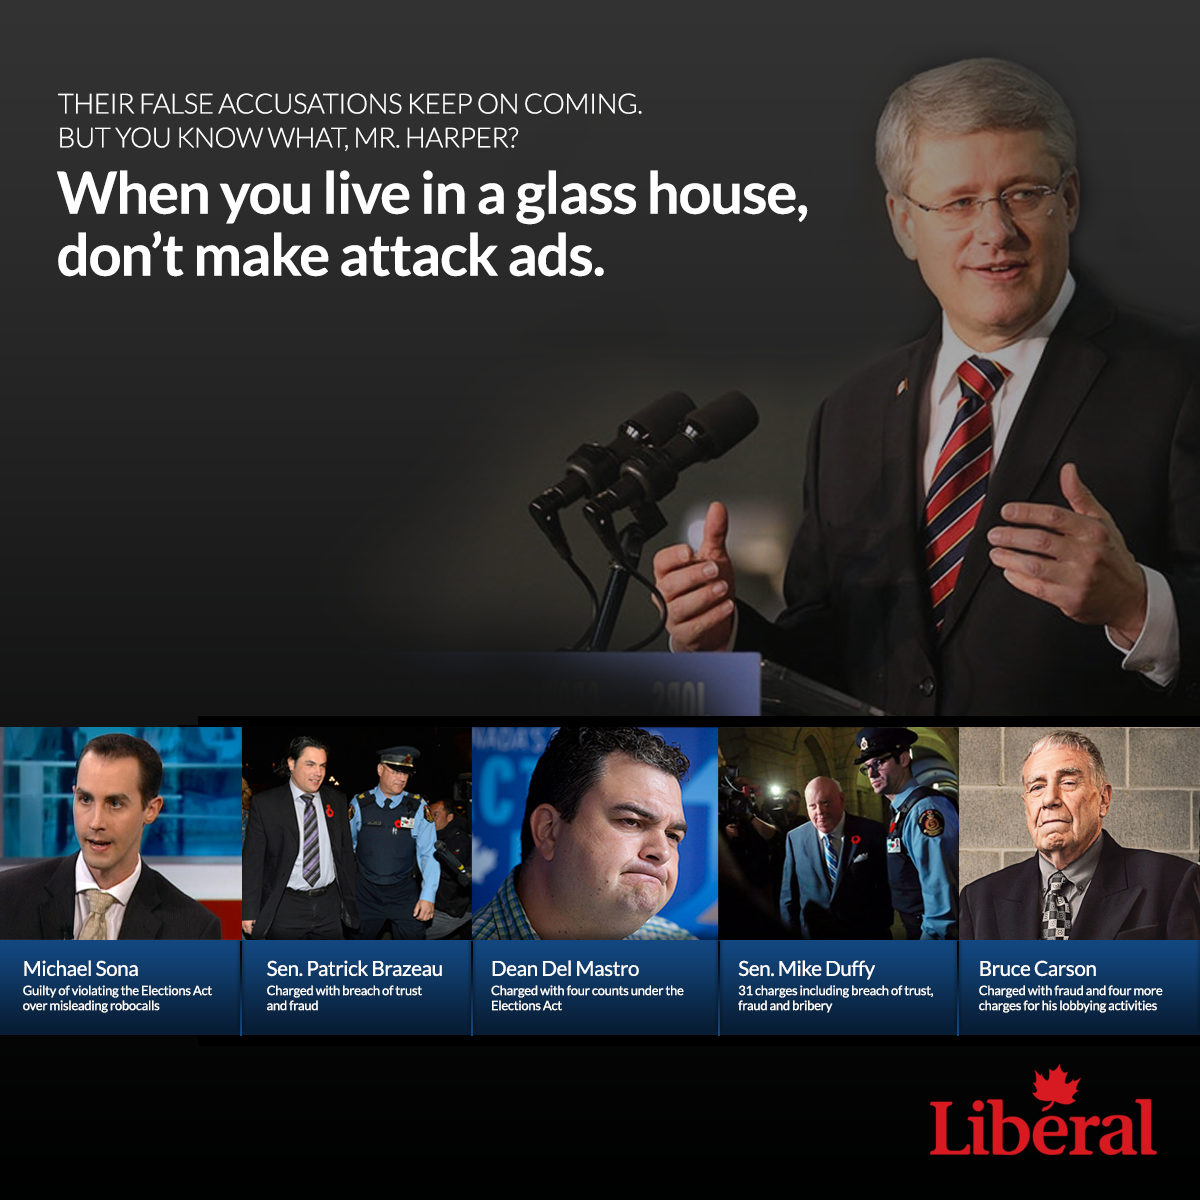 Their false accusations keep on coming. But you know what, Mr. Harper? When you live in a glass house, don't make attack ads.